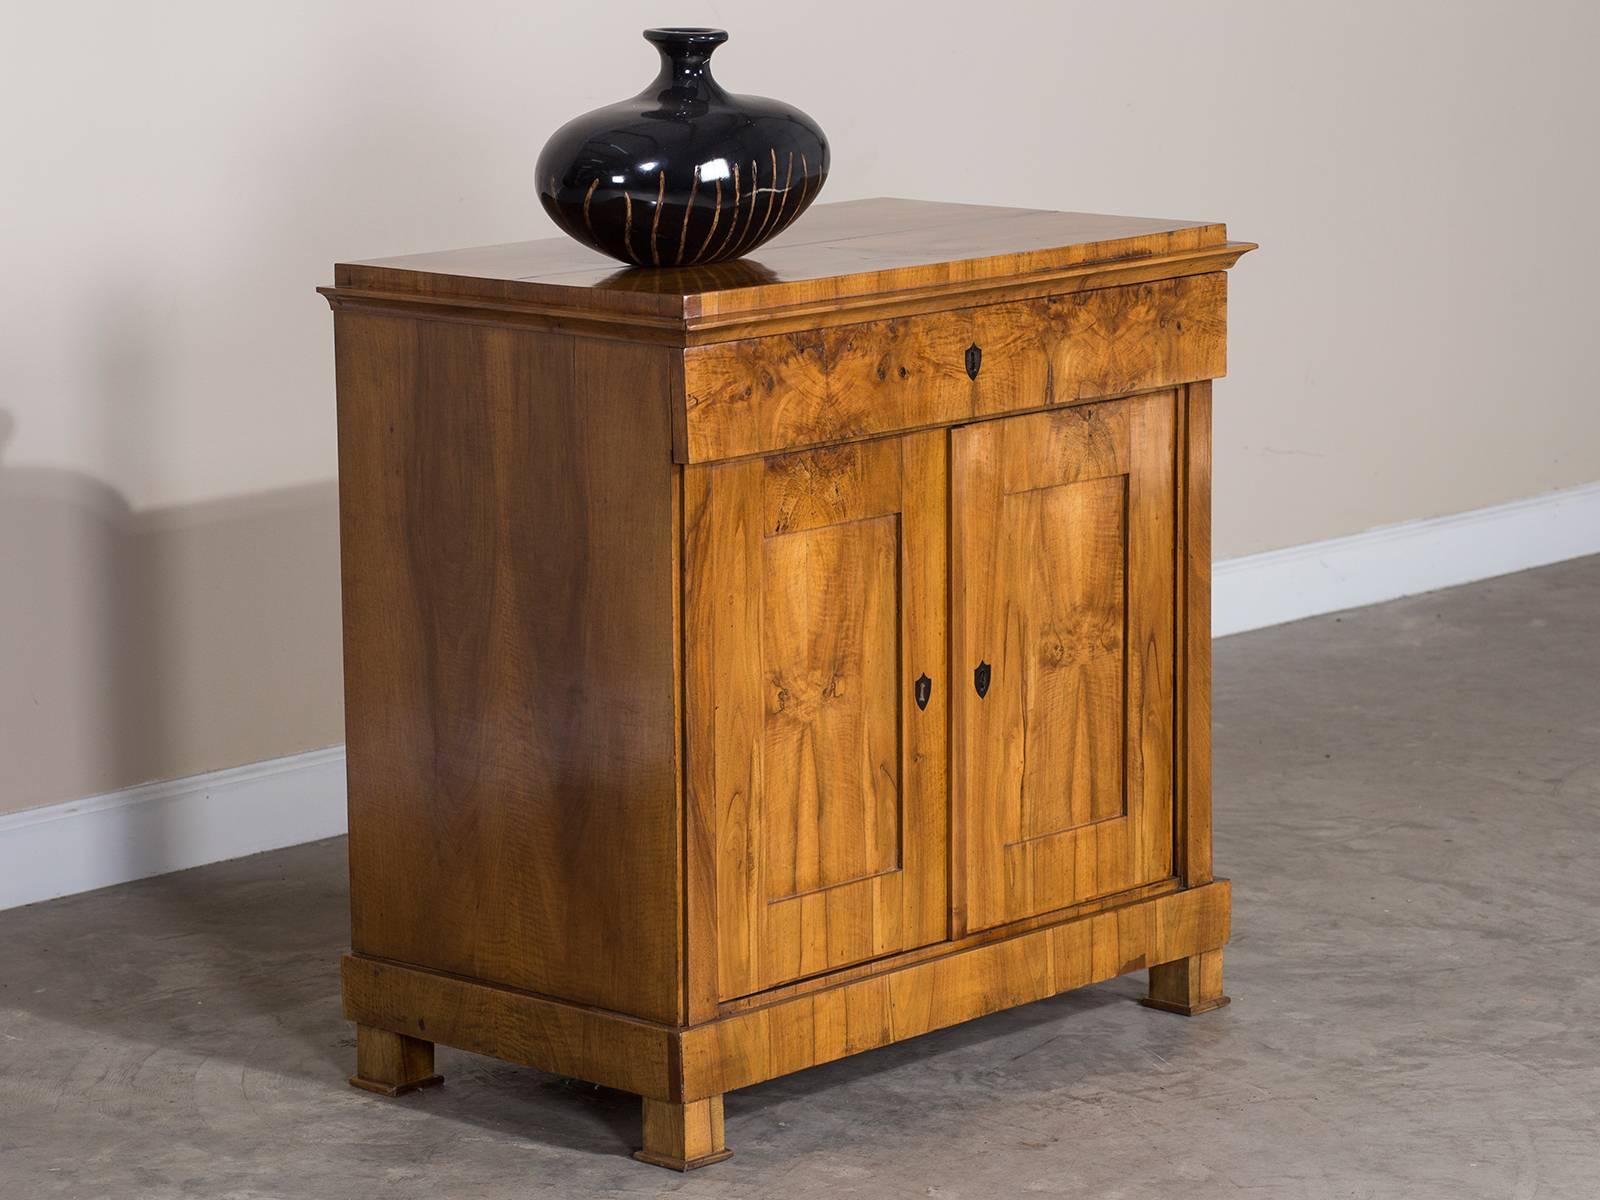 Receive our new selections direct from 1stdibs by email each week. Please click Follow Dealer below and see them first!

This antique Biedermeier walnut buffet from either Austria or Germany, circa 1835 is an excellent example of the taste for